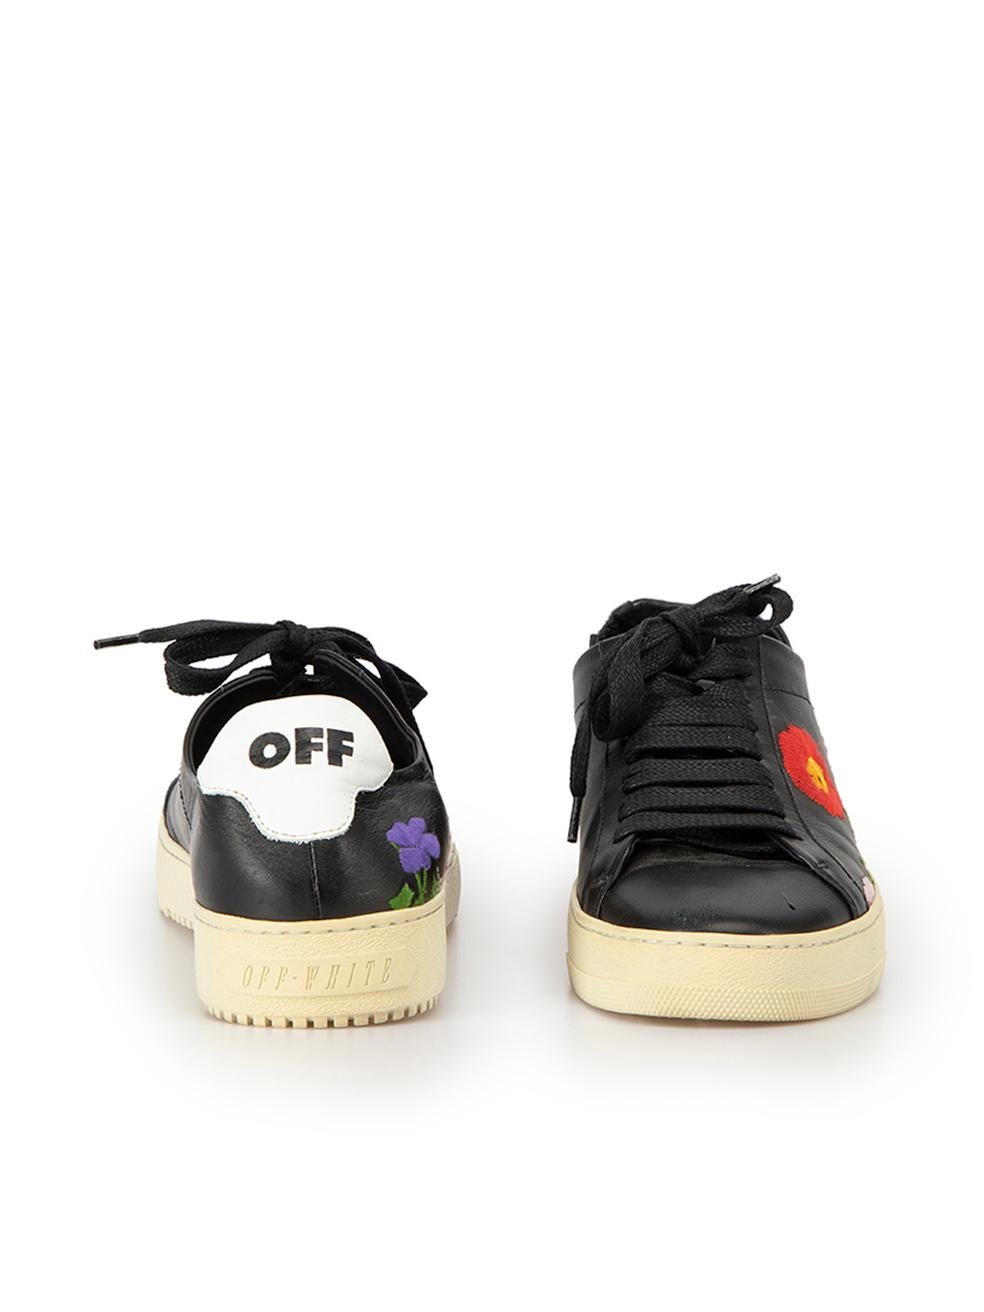 Off-White Women's Black Leather Flower Embroidered Trainers In Good Condition For Sale In London, GB